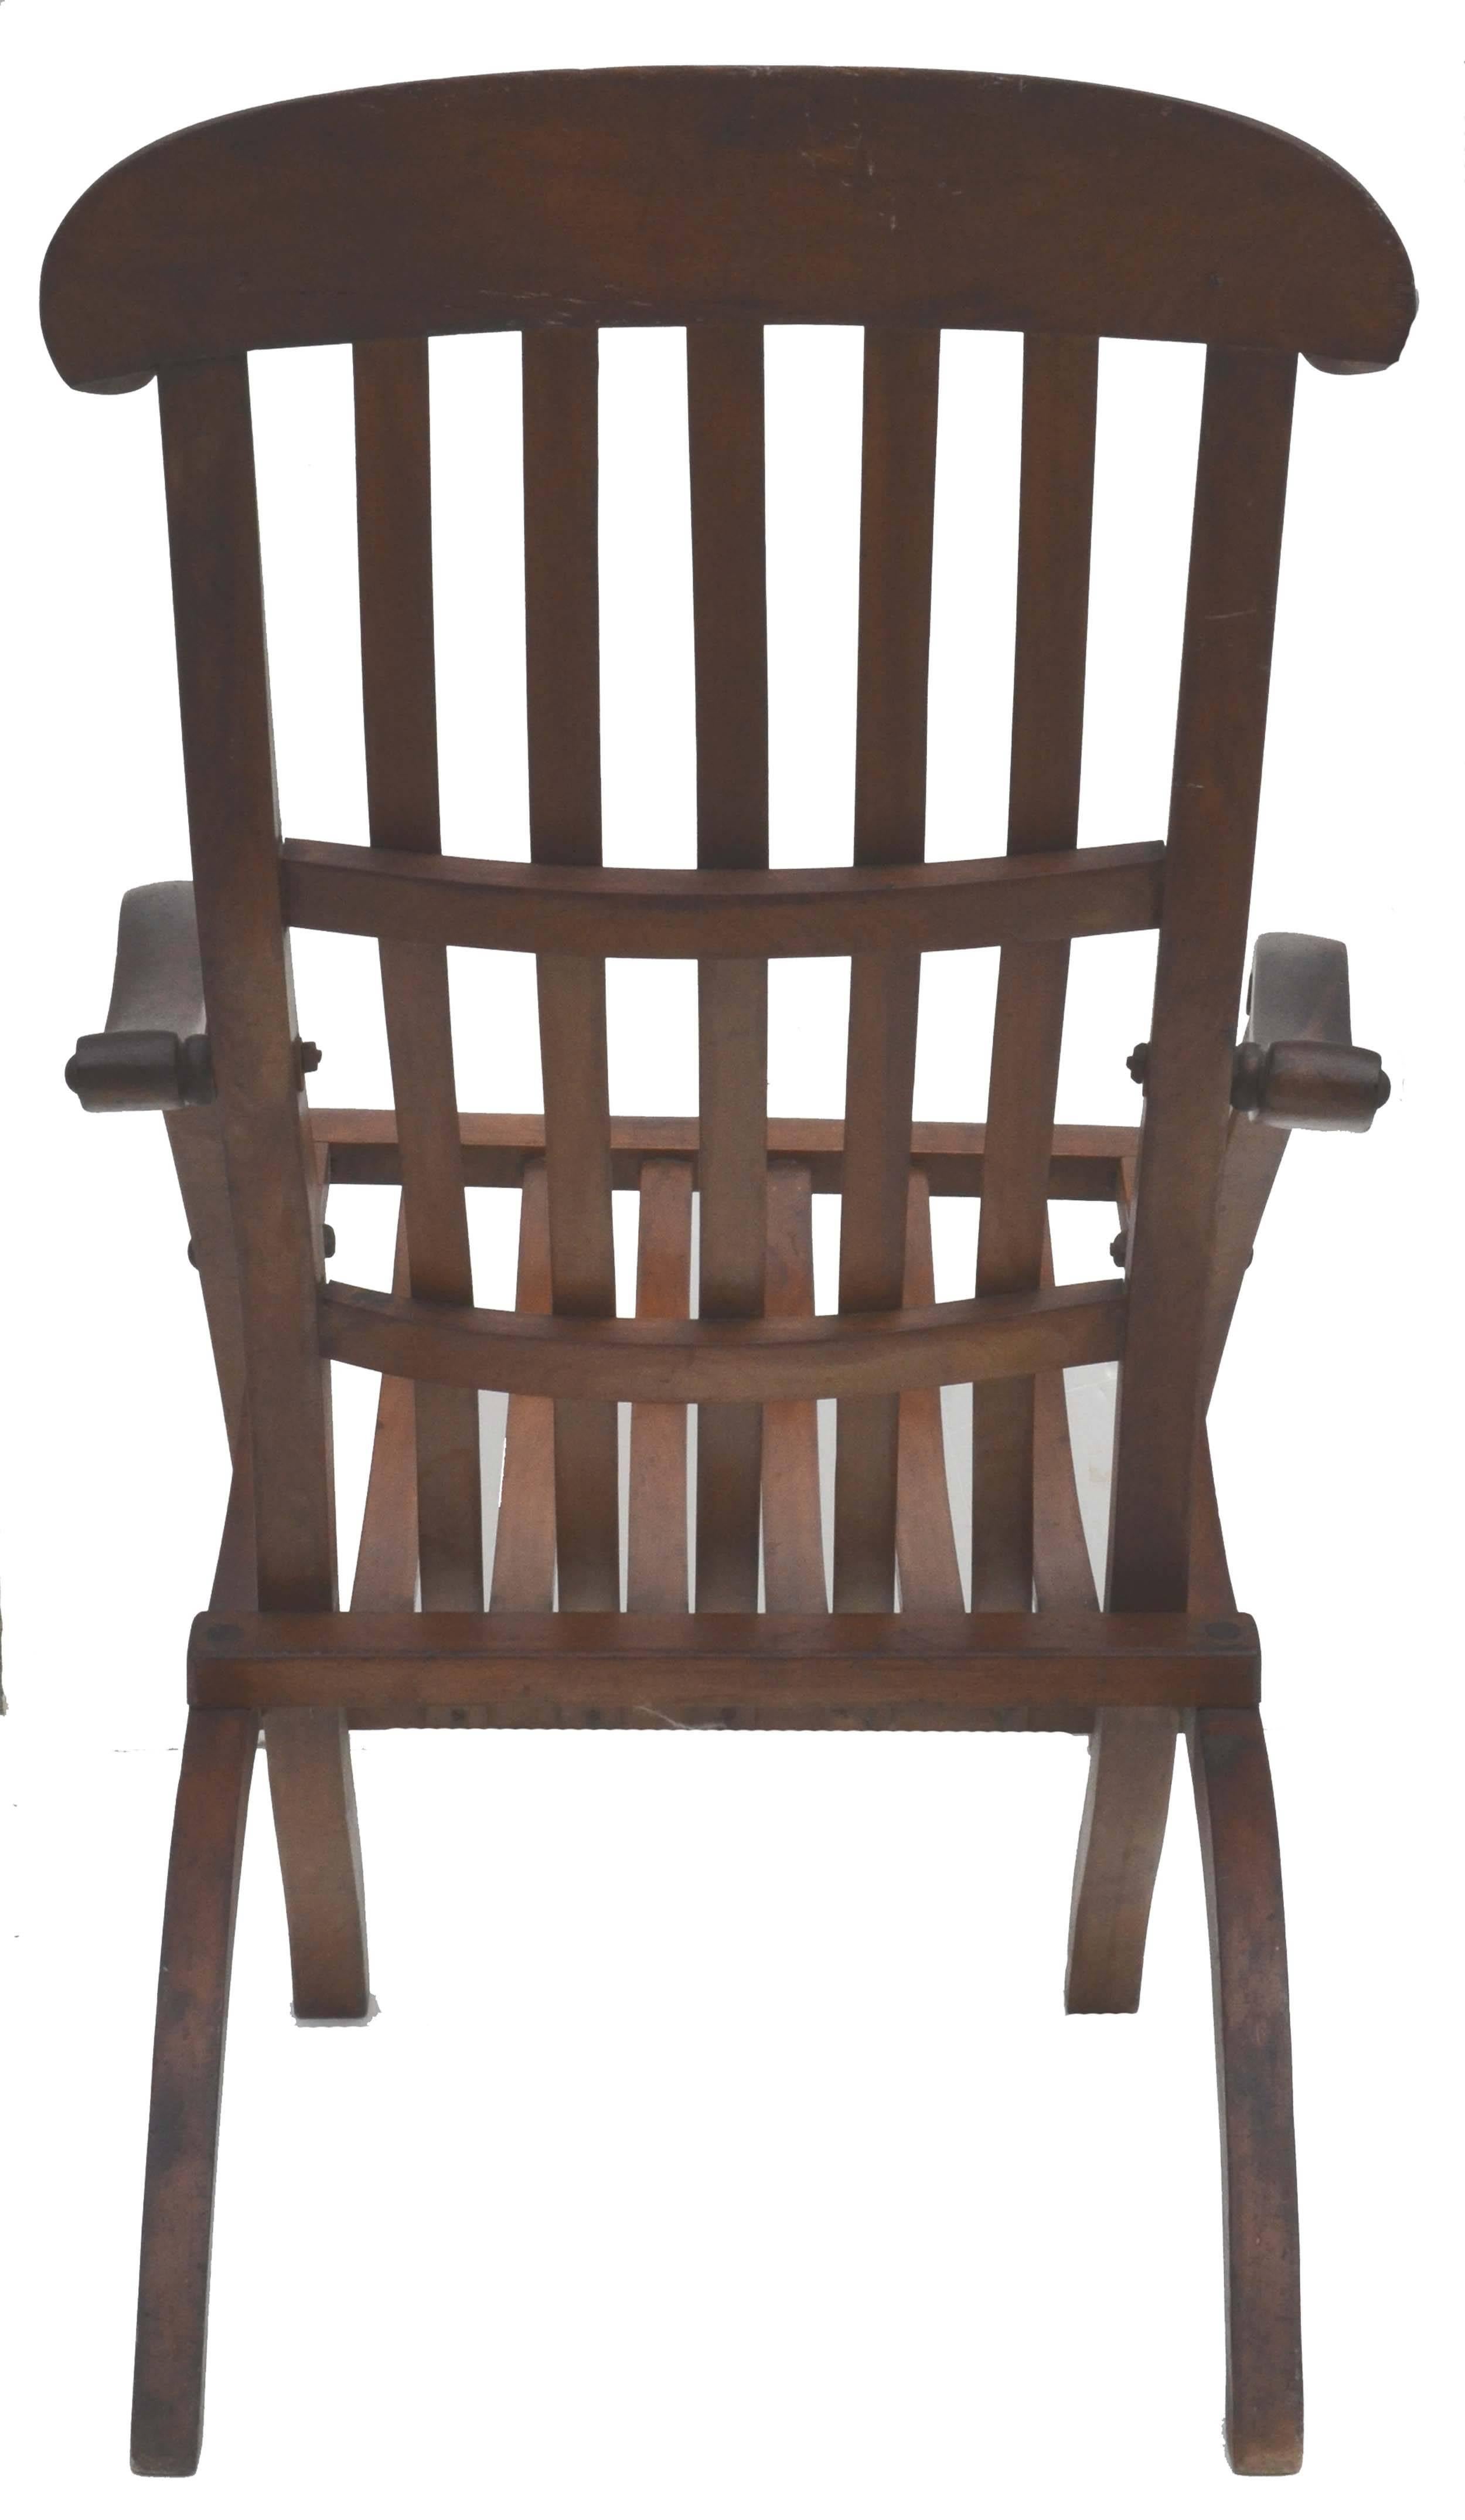 Late Victorian Early 20th Century Teak Folding Lounge Chair